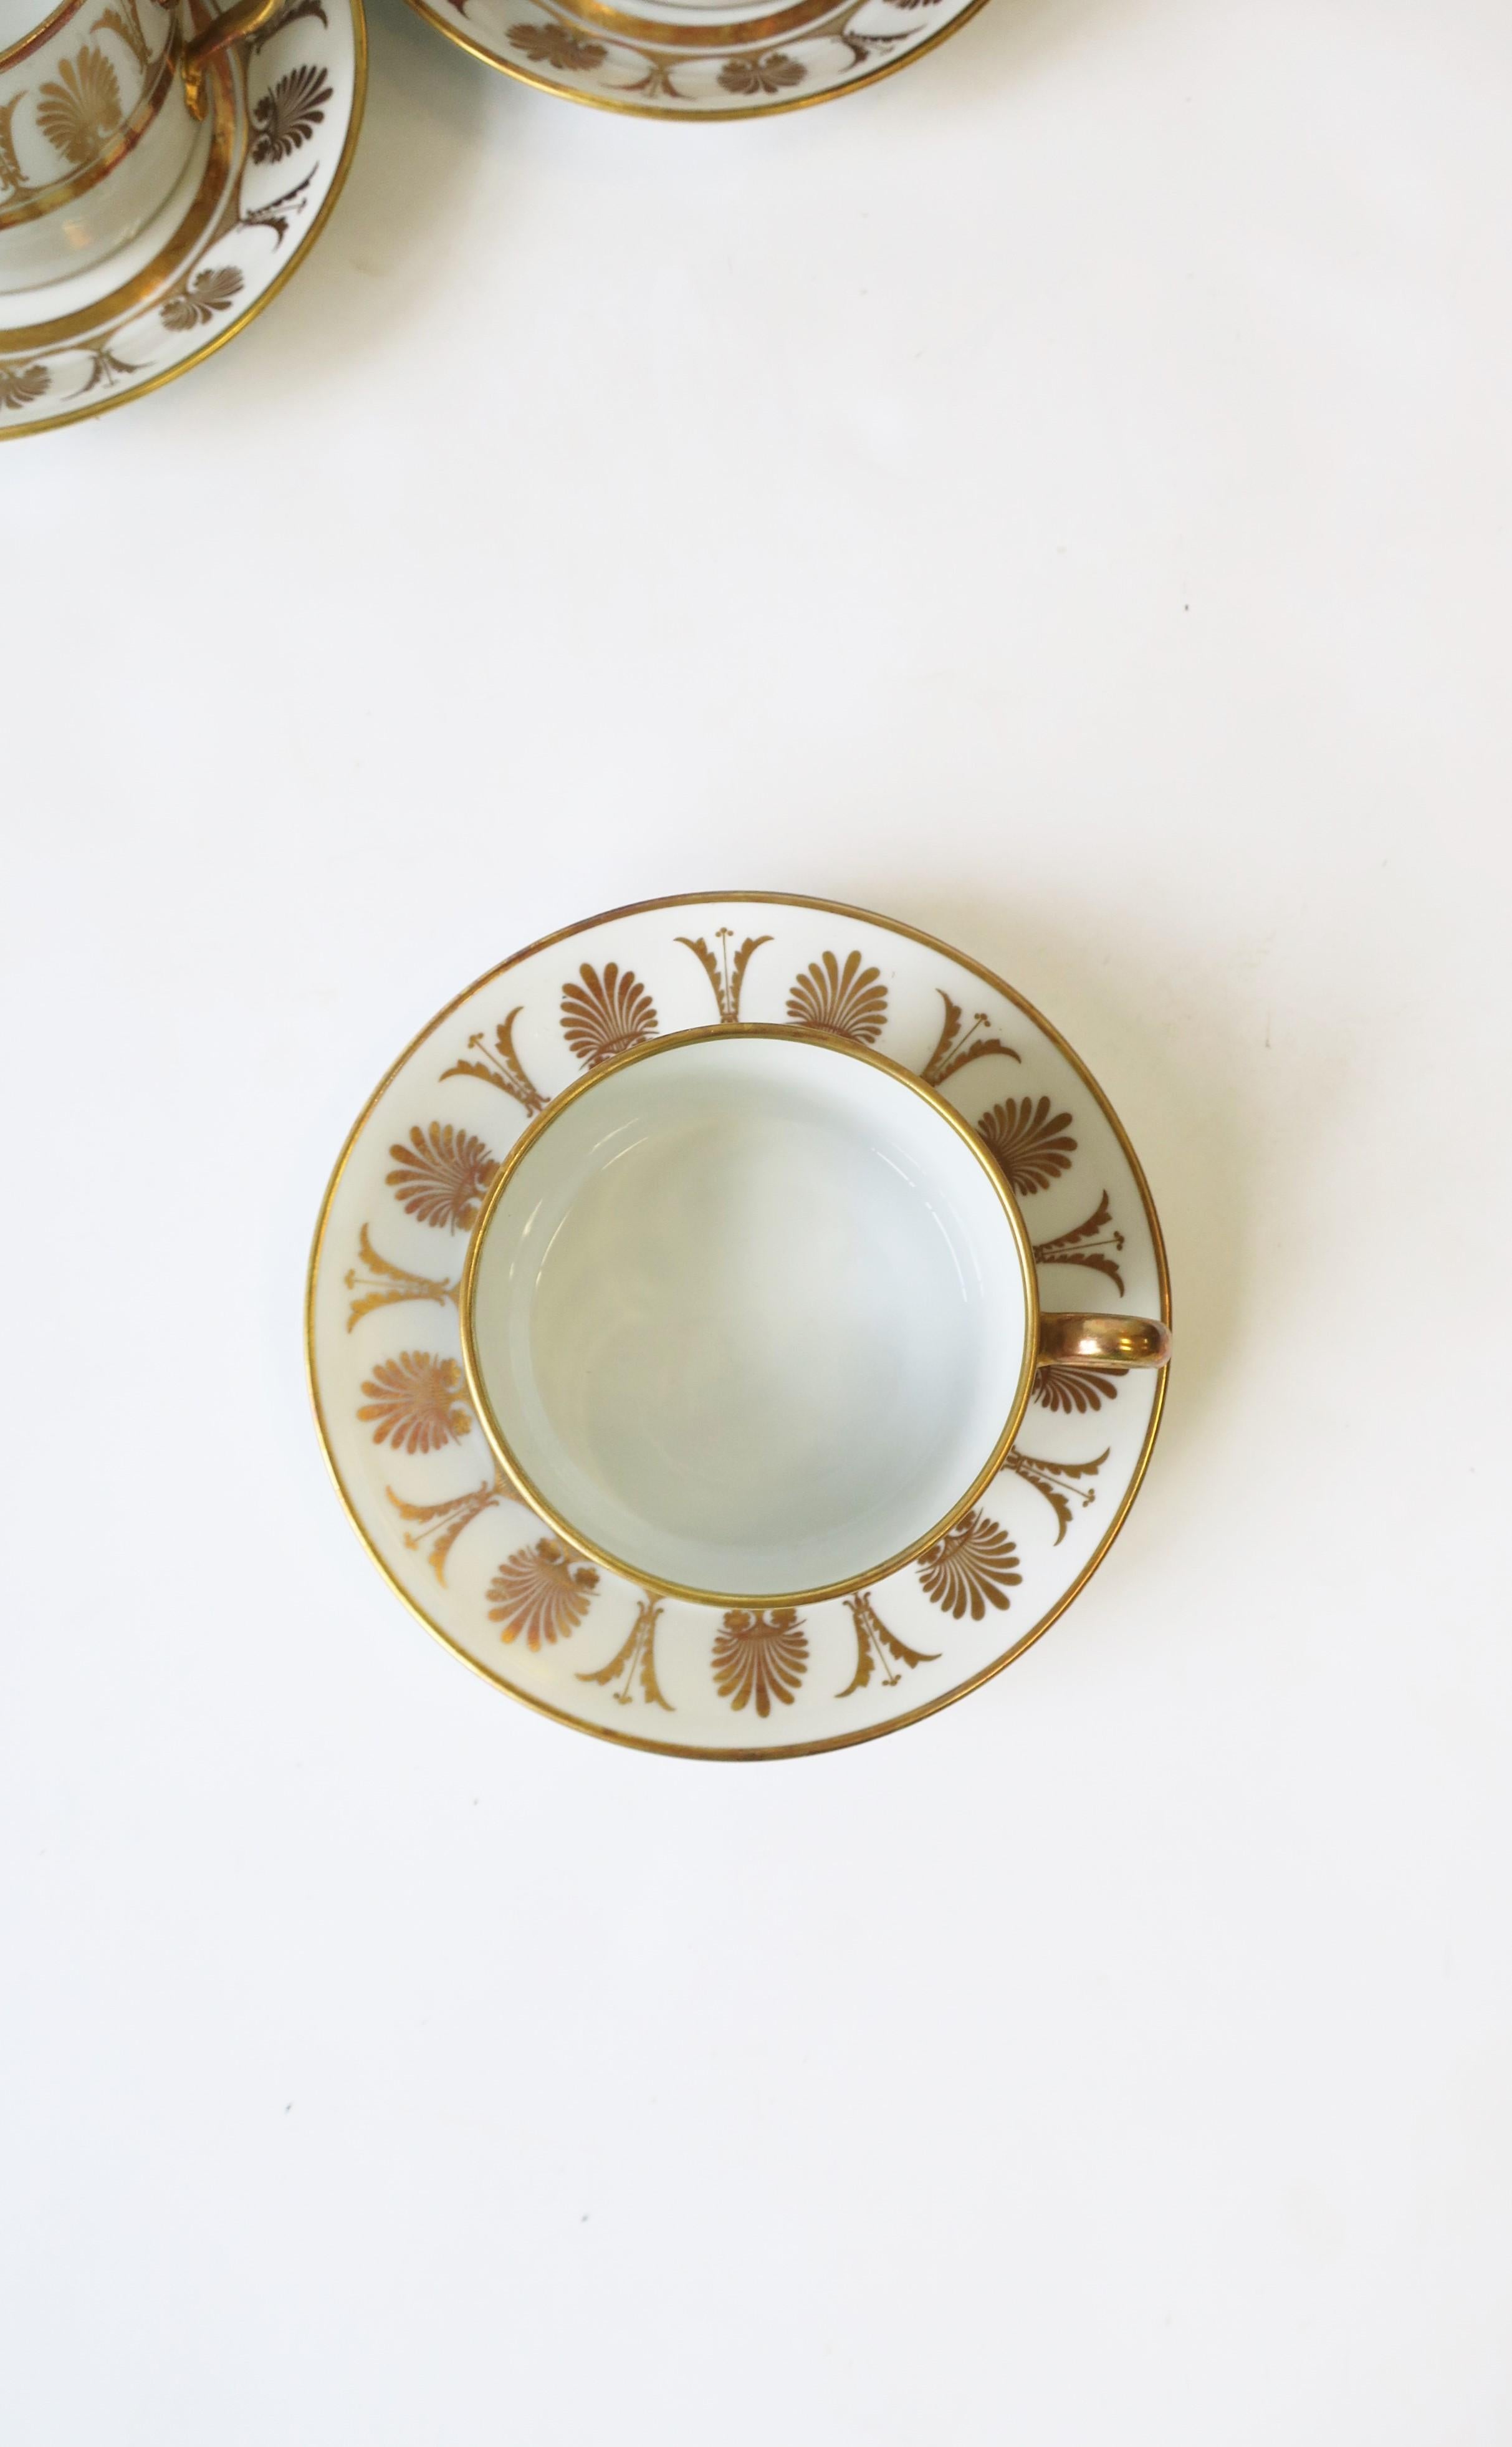 Richard Ginori Vintage Italian White & Gold Coffee or Tea Cup Saucer, Set of 12 For Sale 3